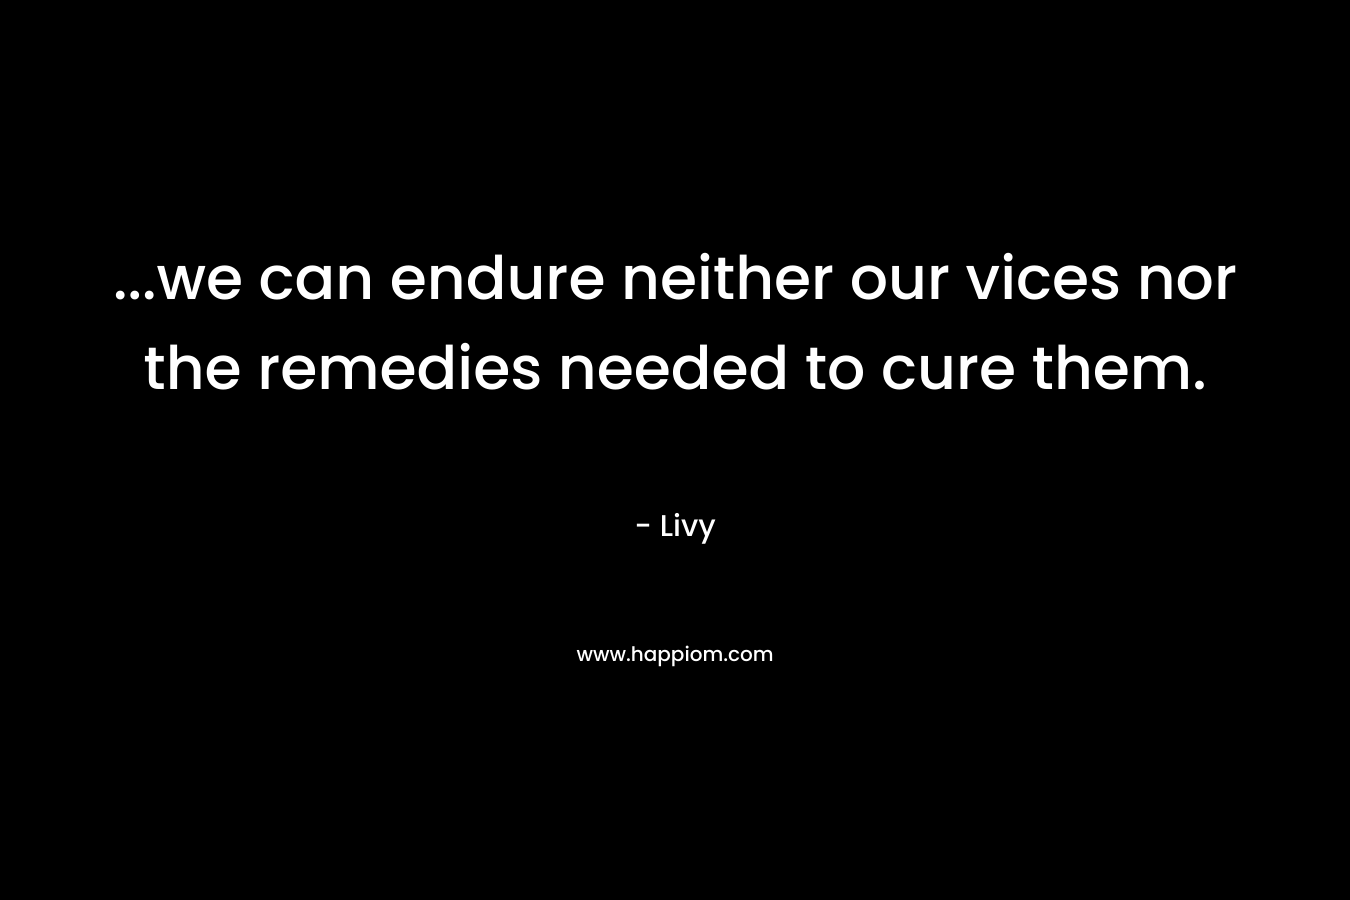 ...we can endure neither our vices nor the remedies needed to cure them.